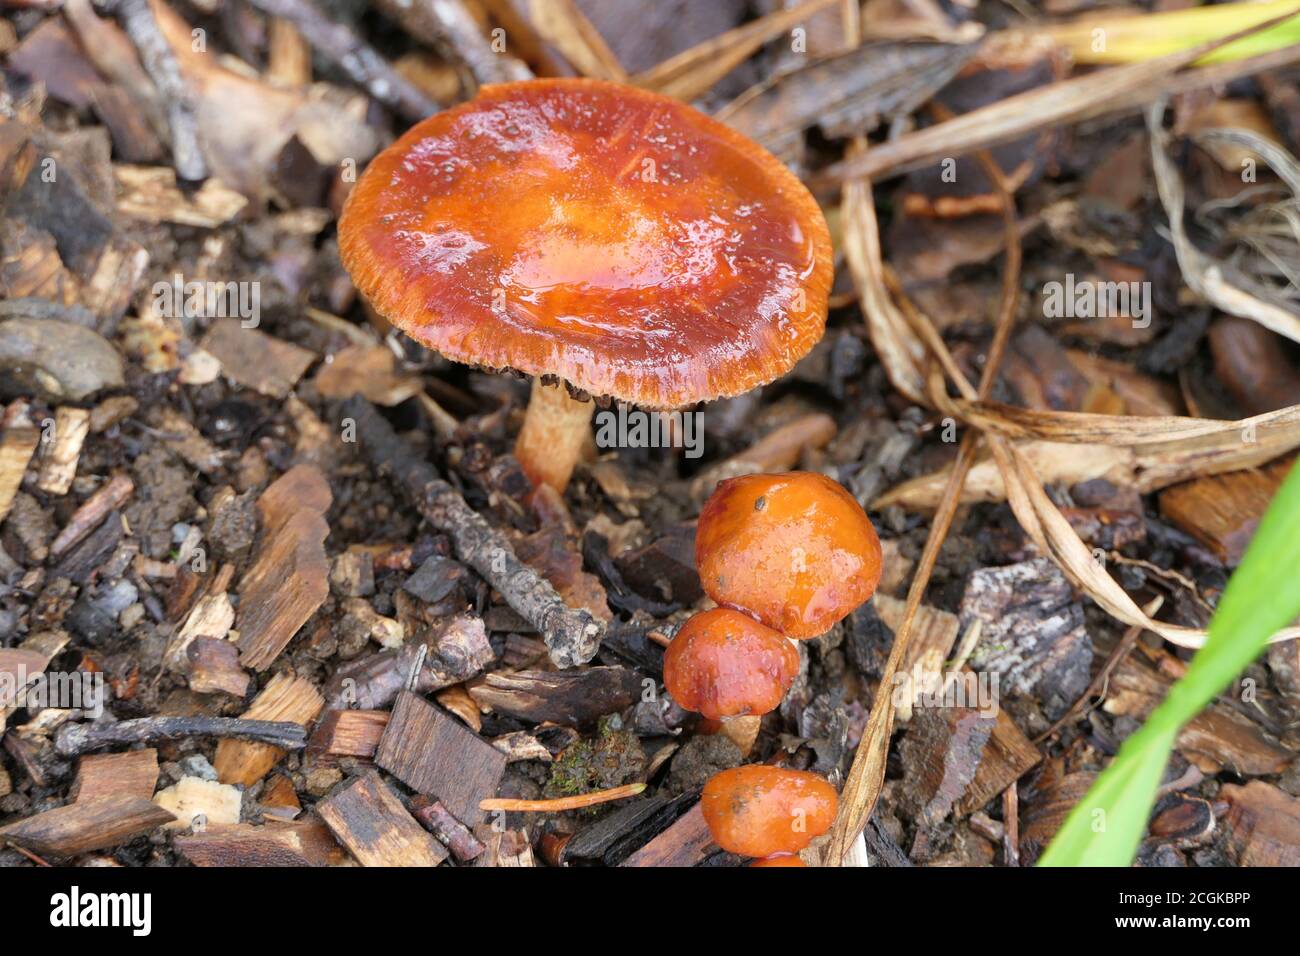 Toadstool or mushroom that beautifies the forest with its orange color Stock Photo